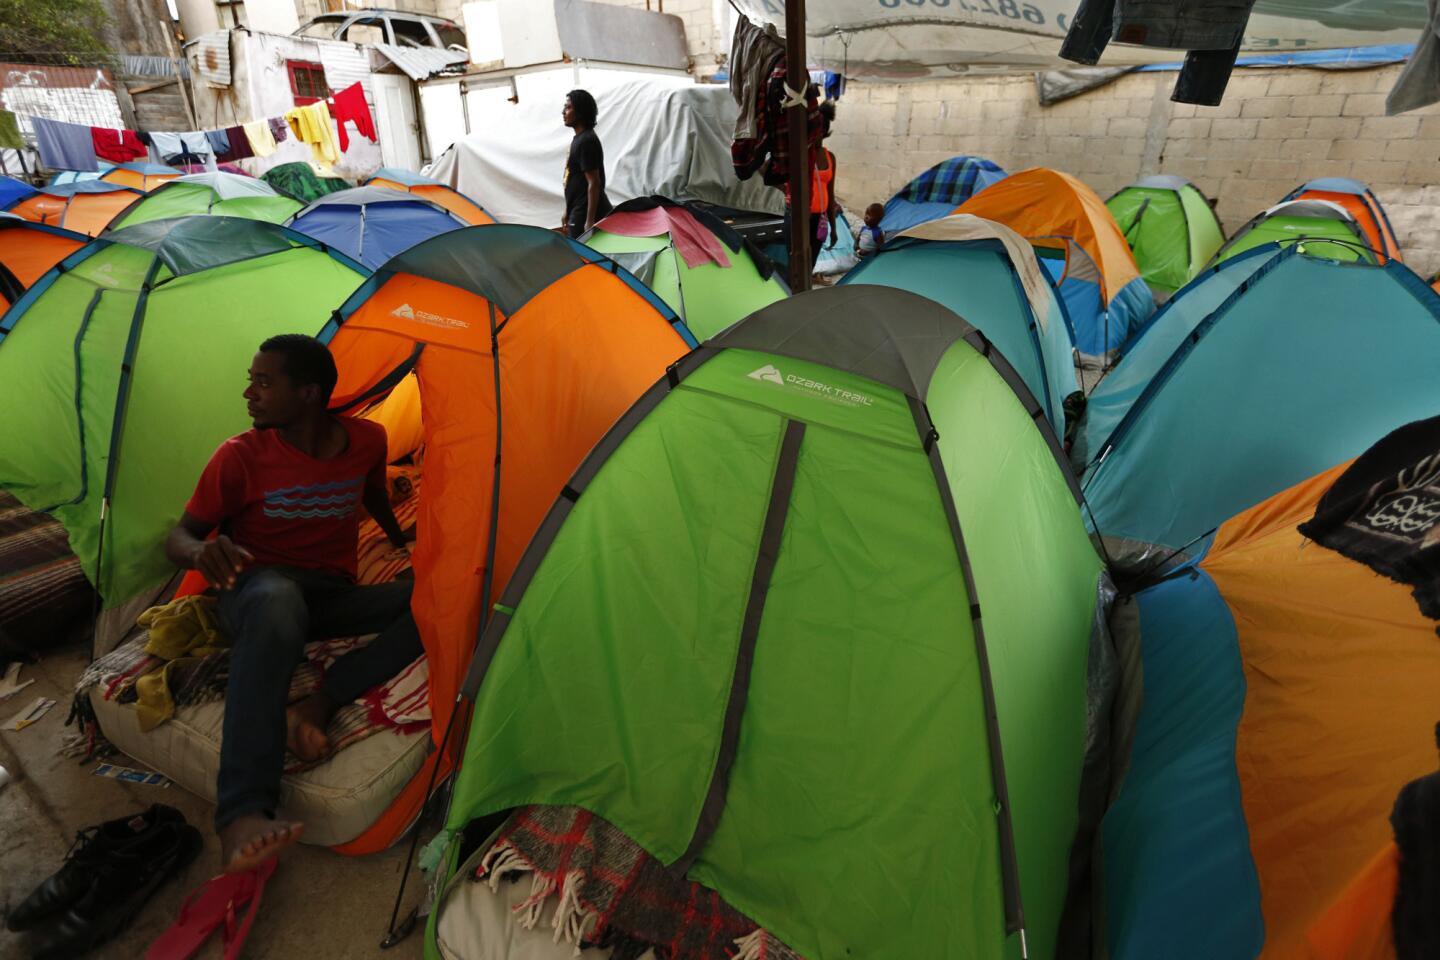 Haitian and African migrants are staying at a small tent city operated by Movimiento Juventud 2000 in Tijuana, Mexico.